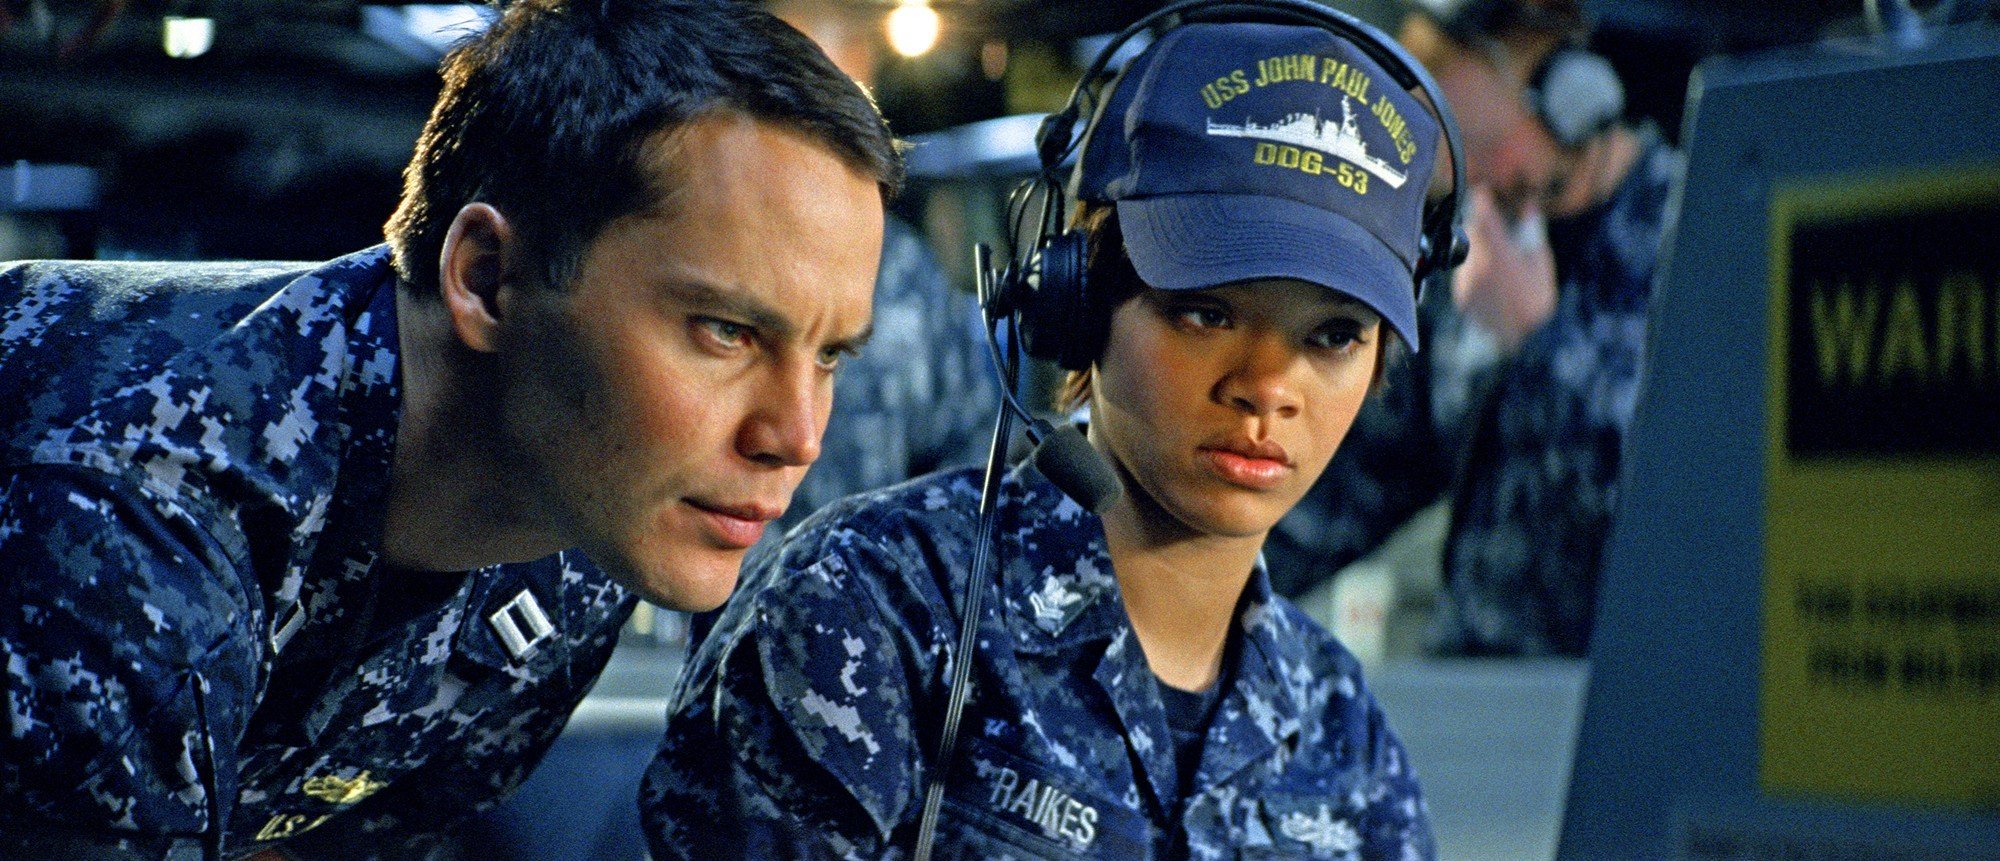 Taylor Kitsch stars as Alex Hopper and Rihanna stars as Raikes in Universal Pictures' Battleship (2012)